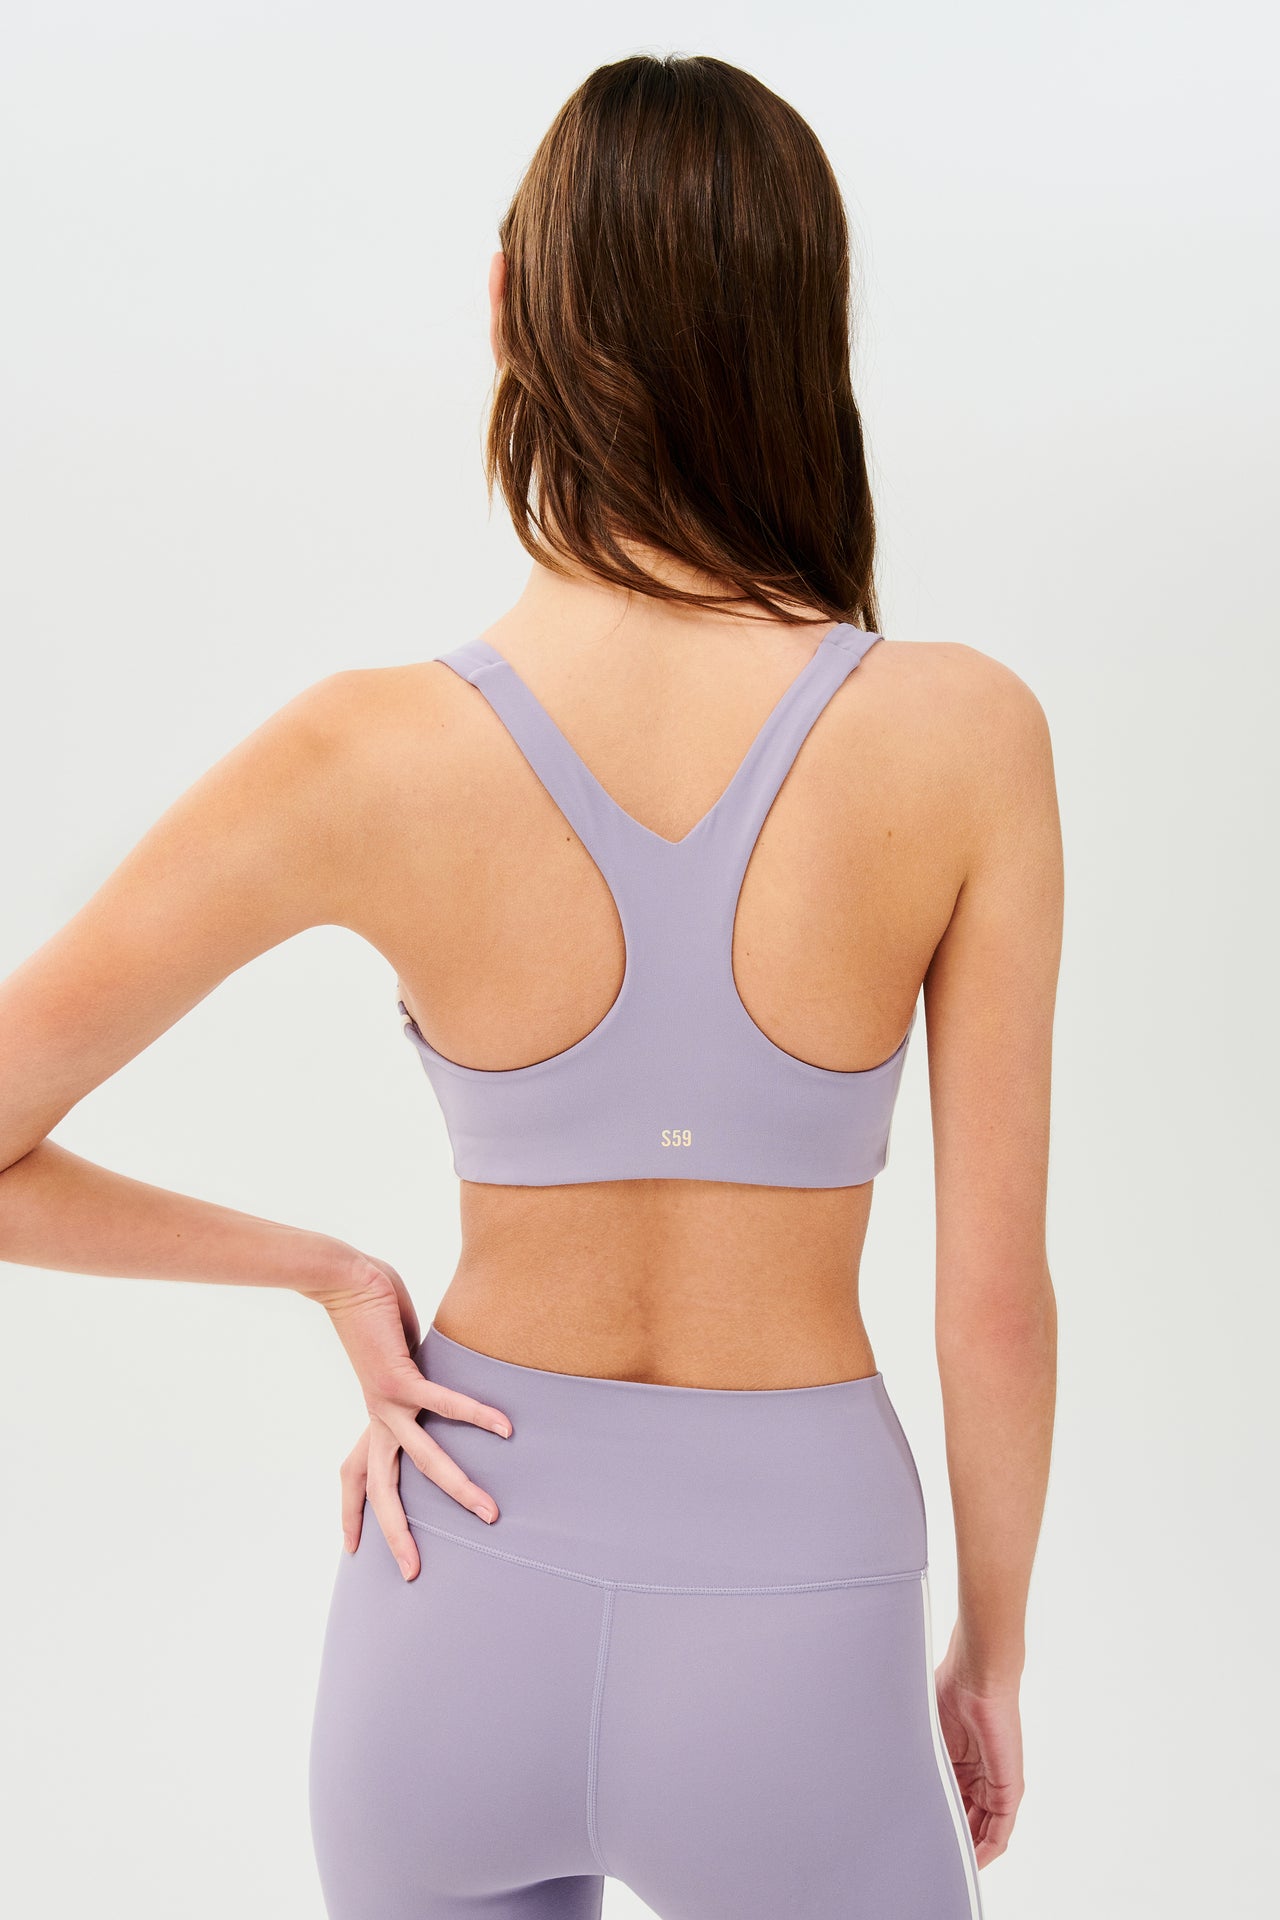 Back view of girl wearing light purple sports bra with two thin white stripes down the side and light purple leggings 